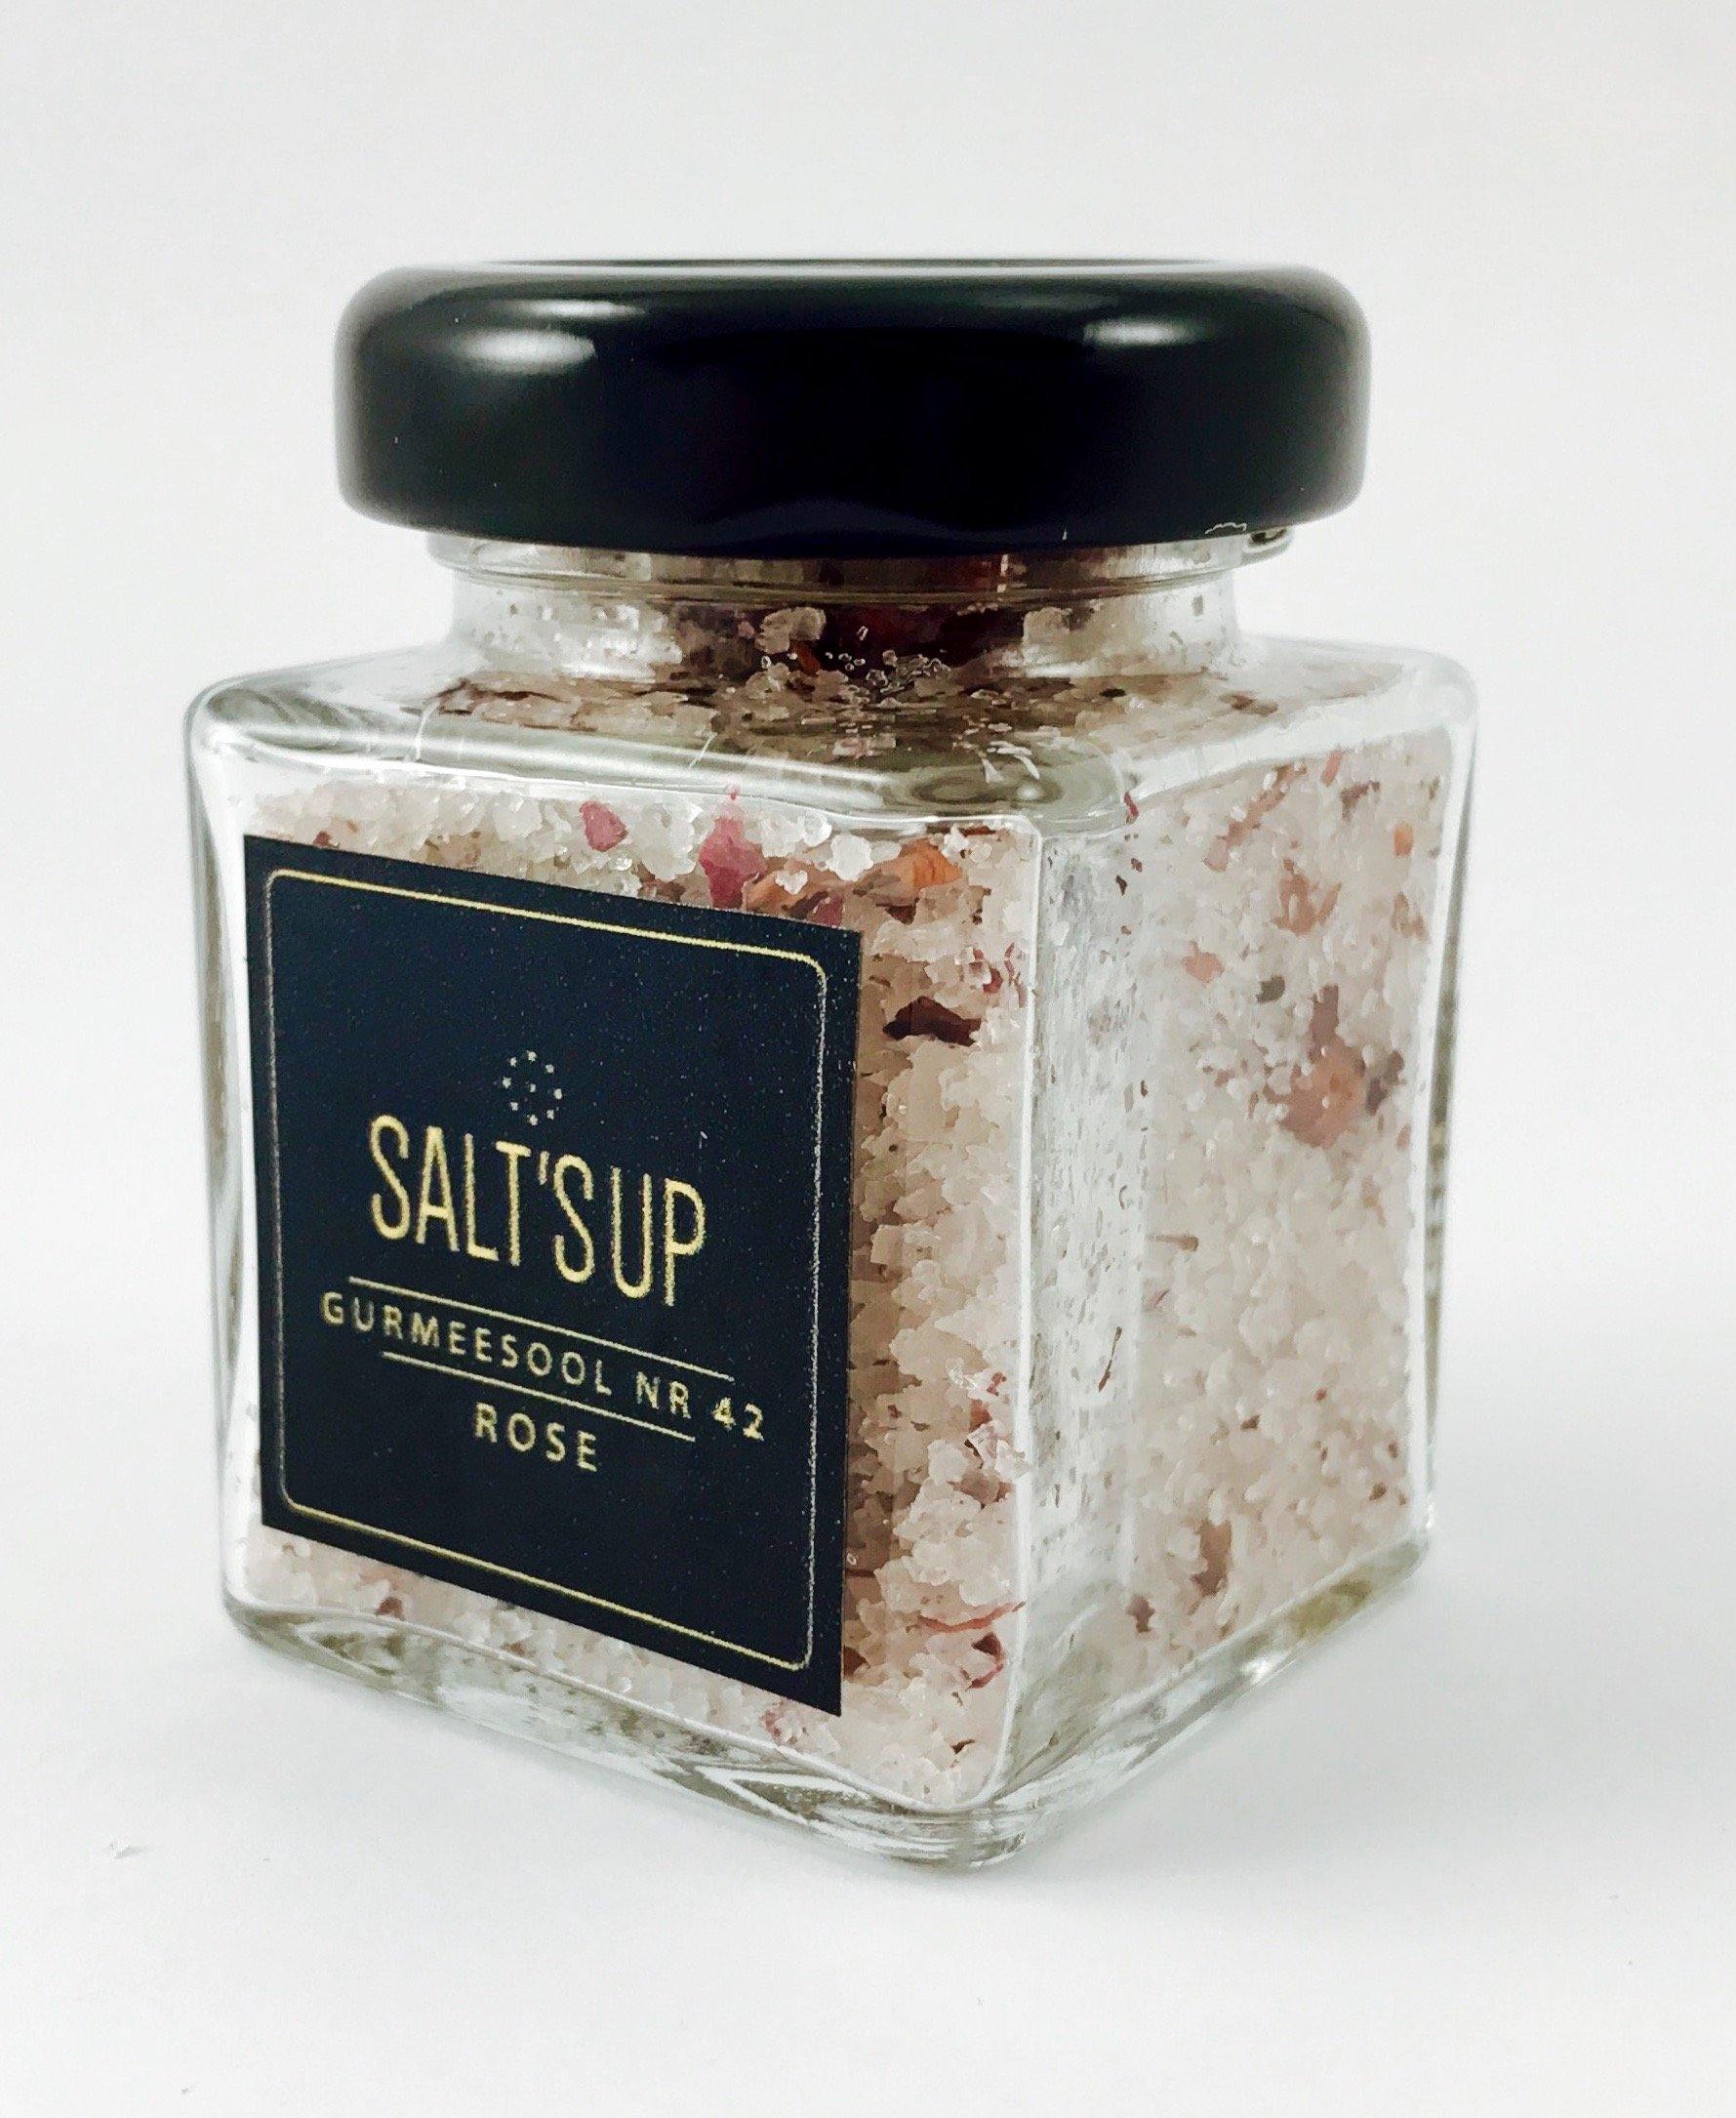 Simply Salt-free Gift Box, Gourmet Spices, Gift for Mom or Dad 